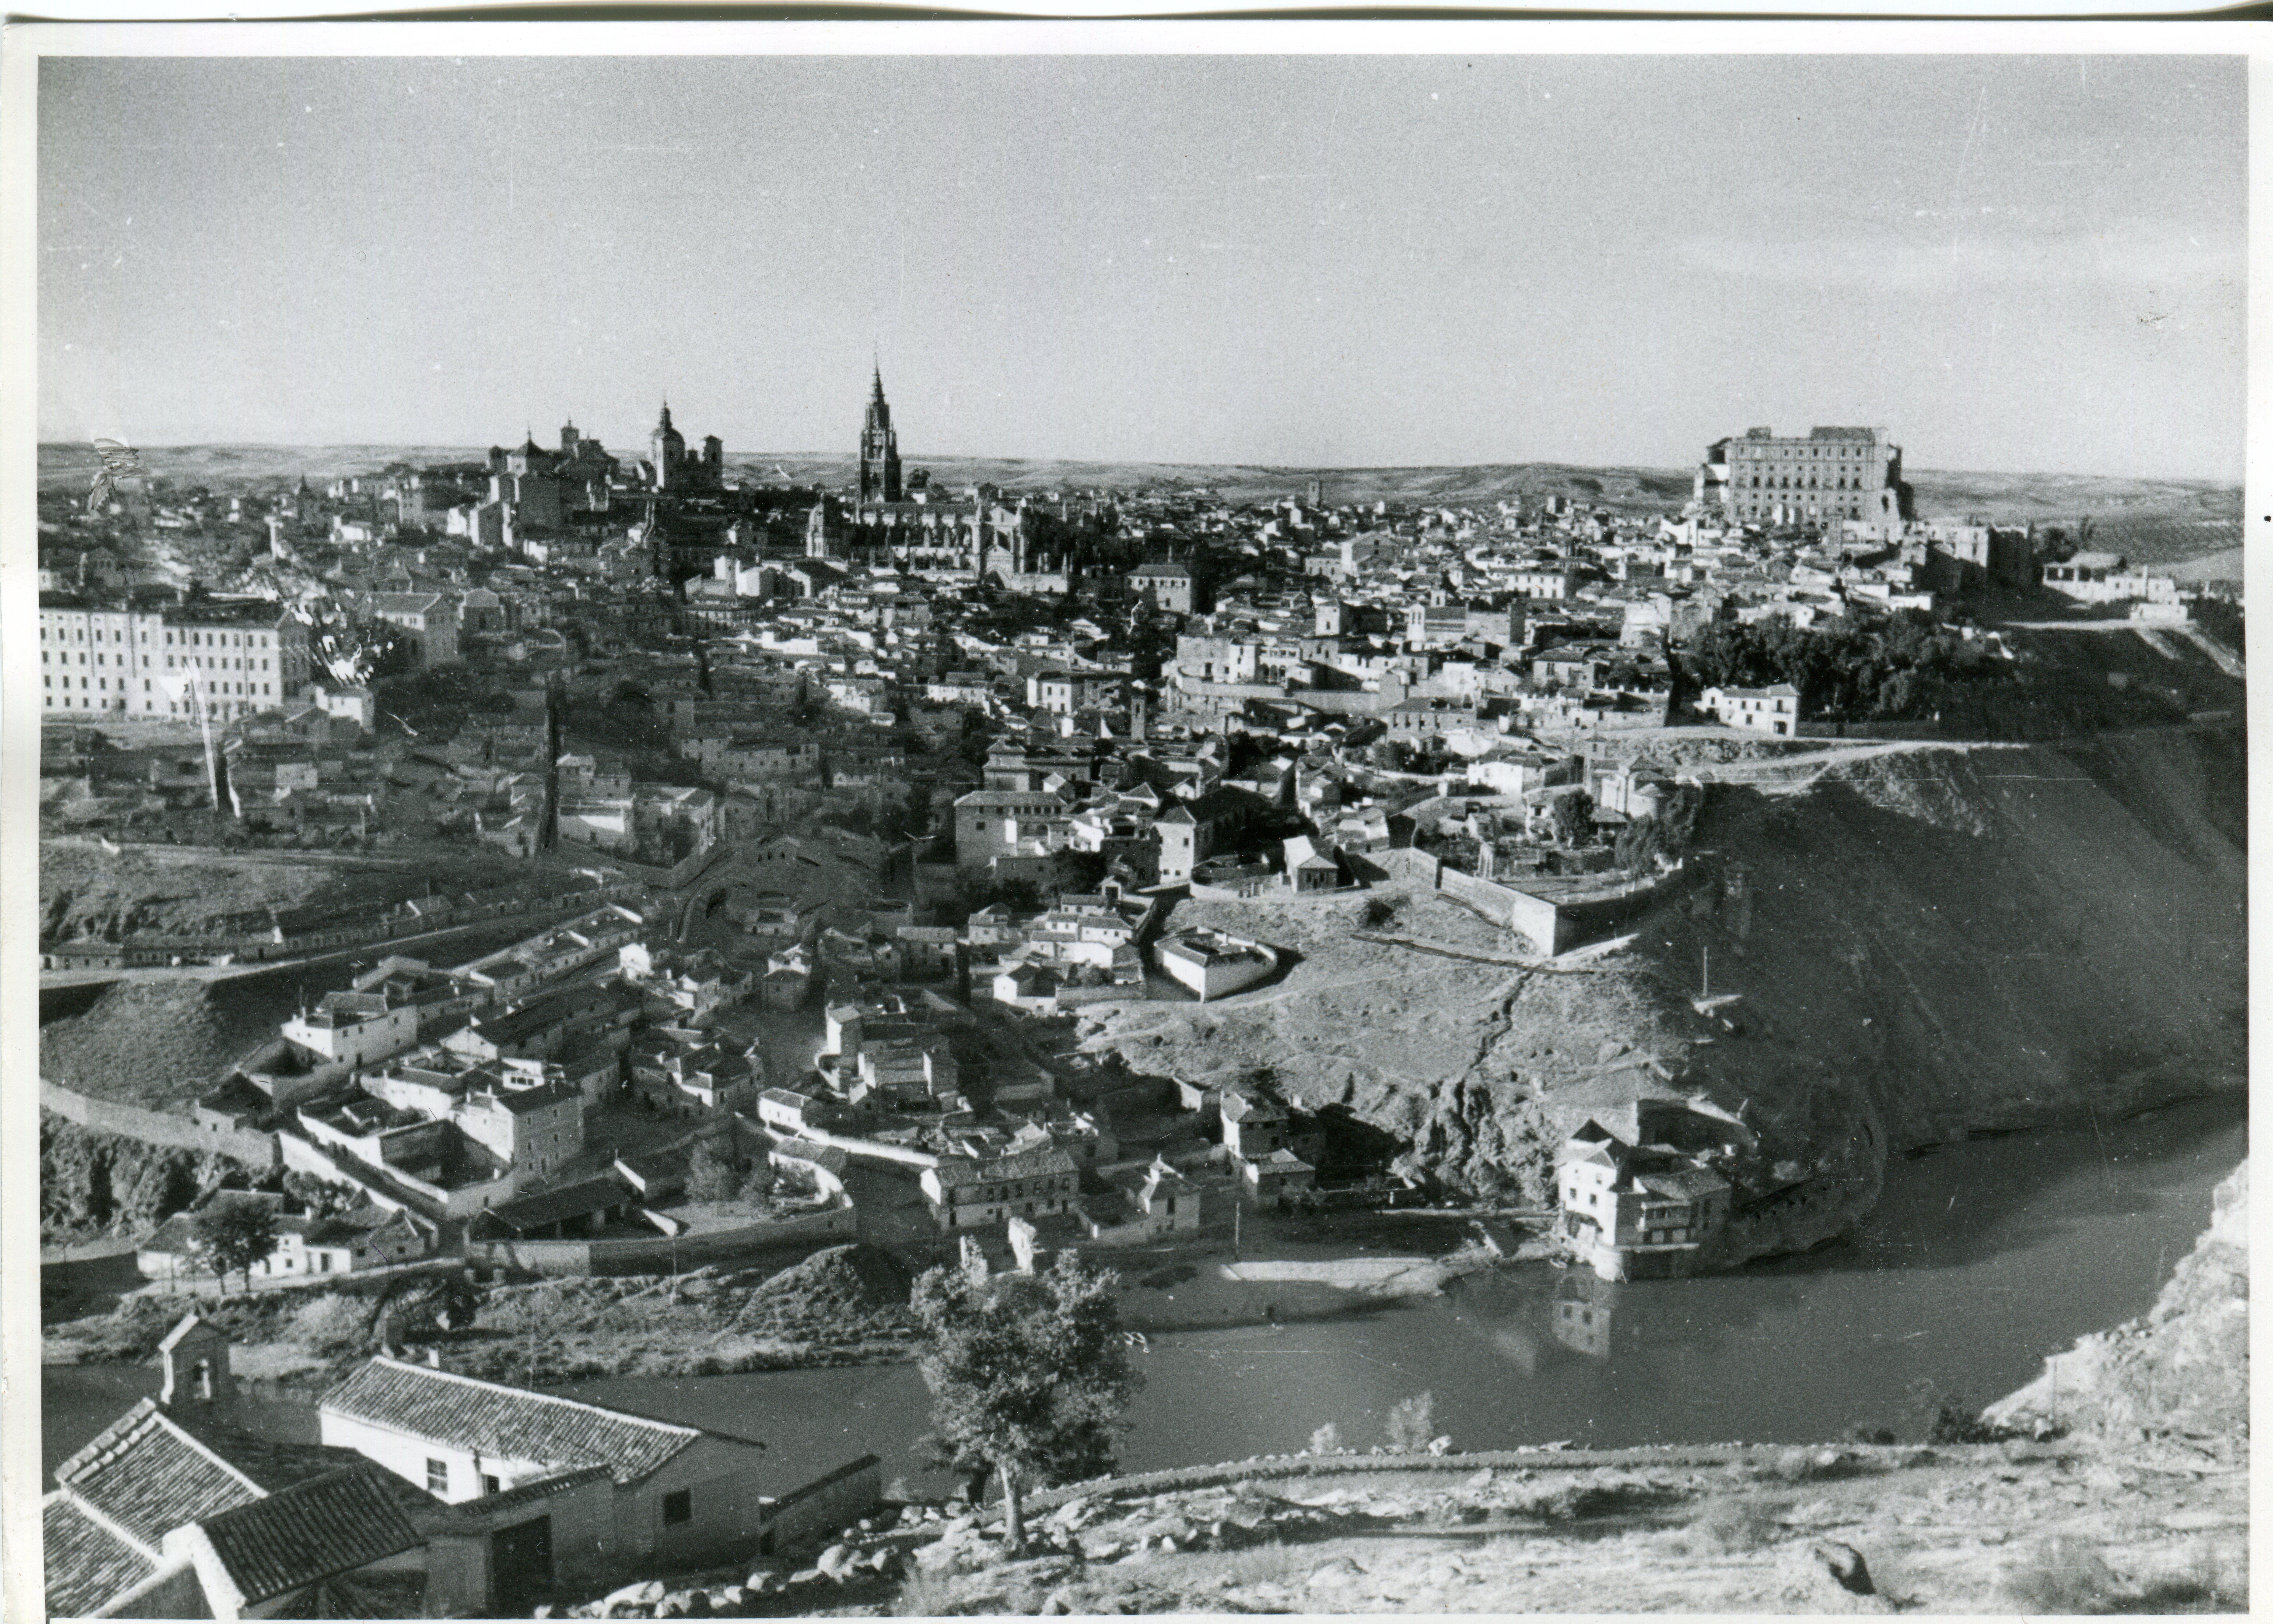 Toledo, Spain, 1936, Alcazar in ruins, Civil War - Portfolio of 5 Prints - Gray Black and White Photograph by Erich Andres